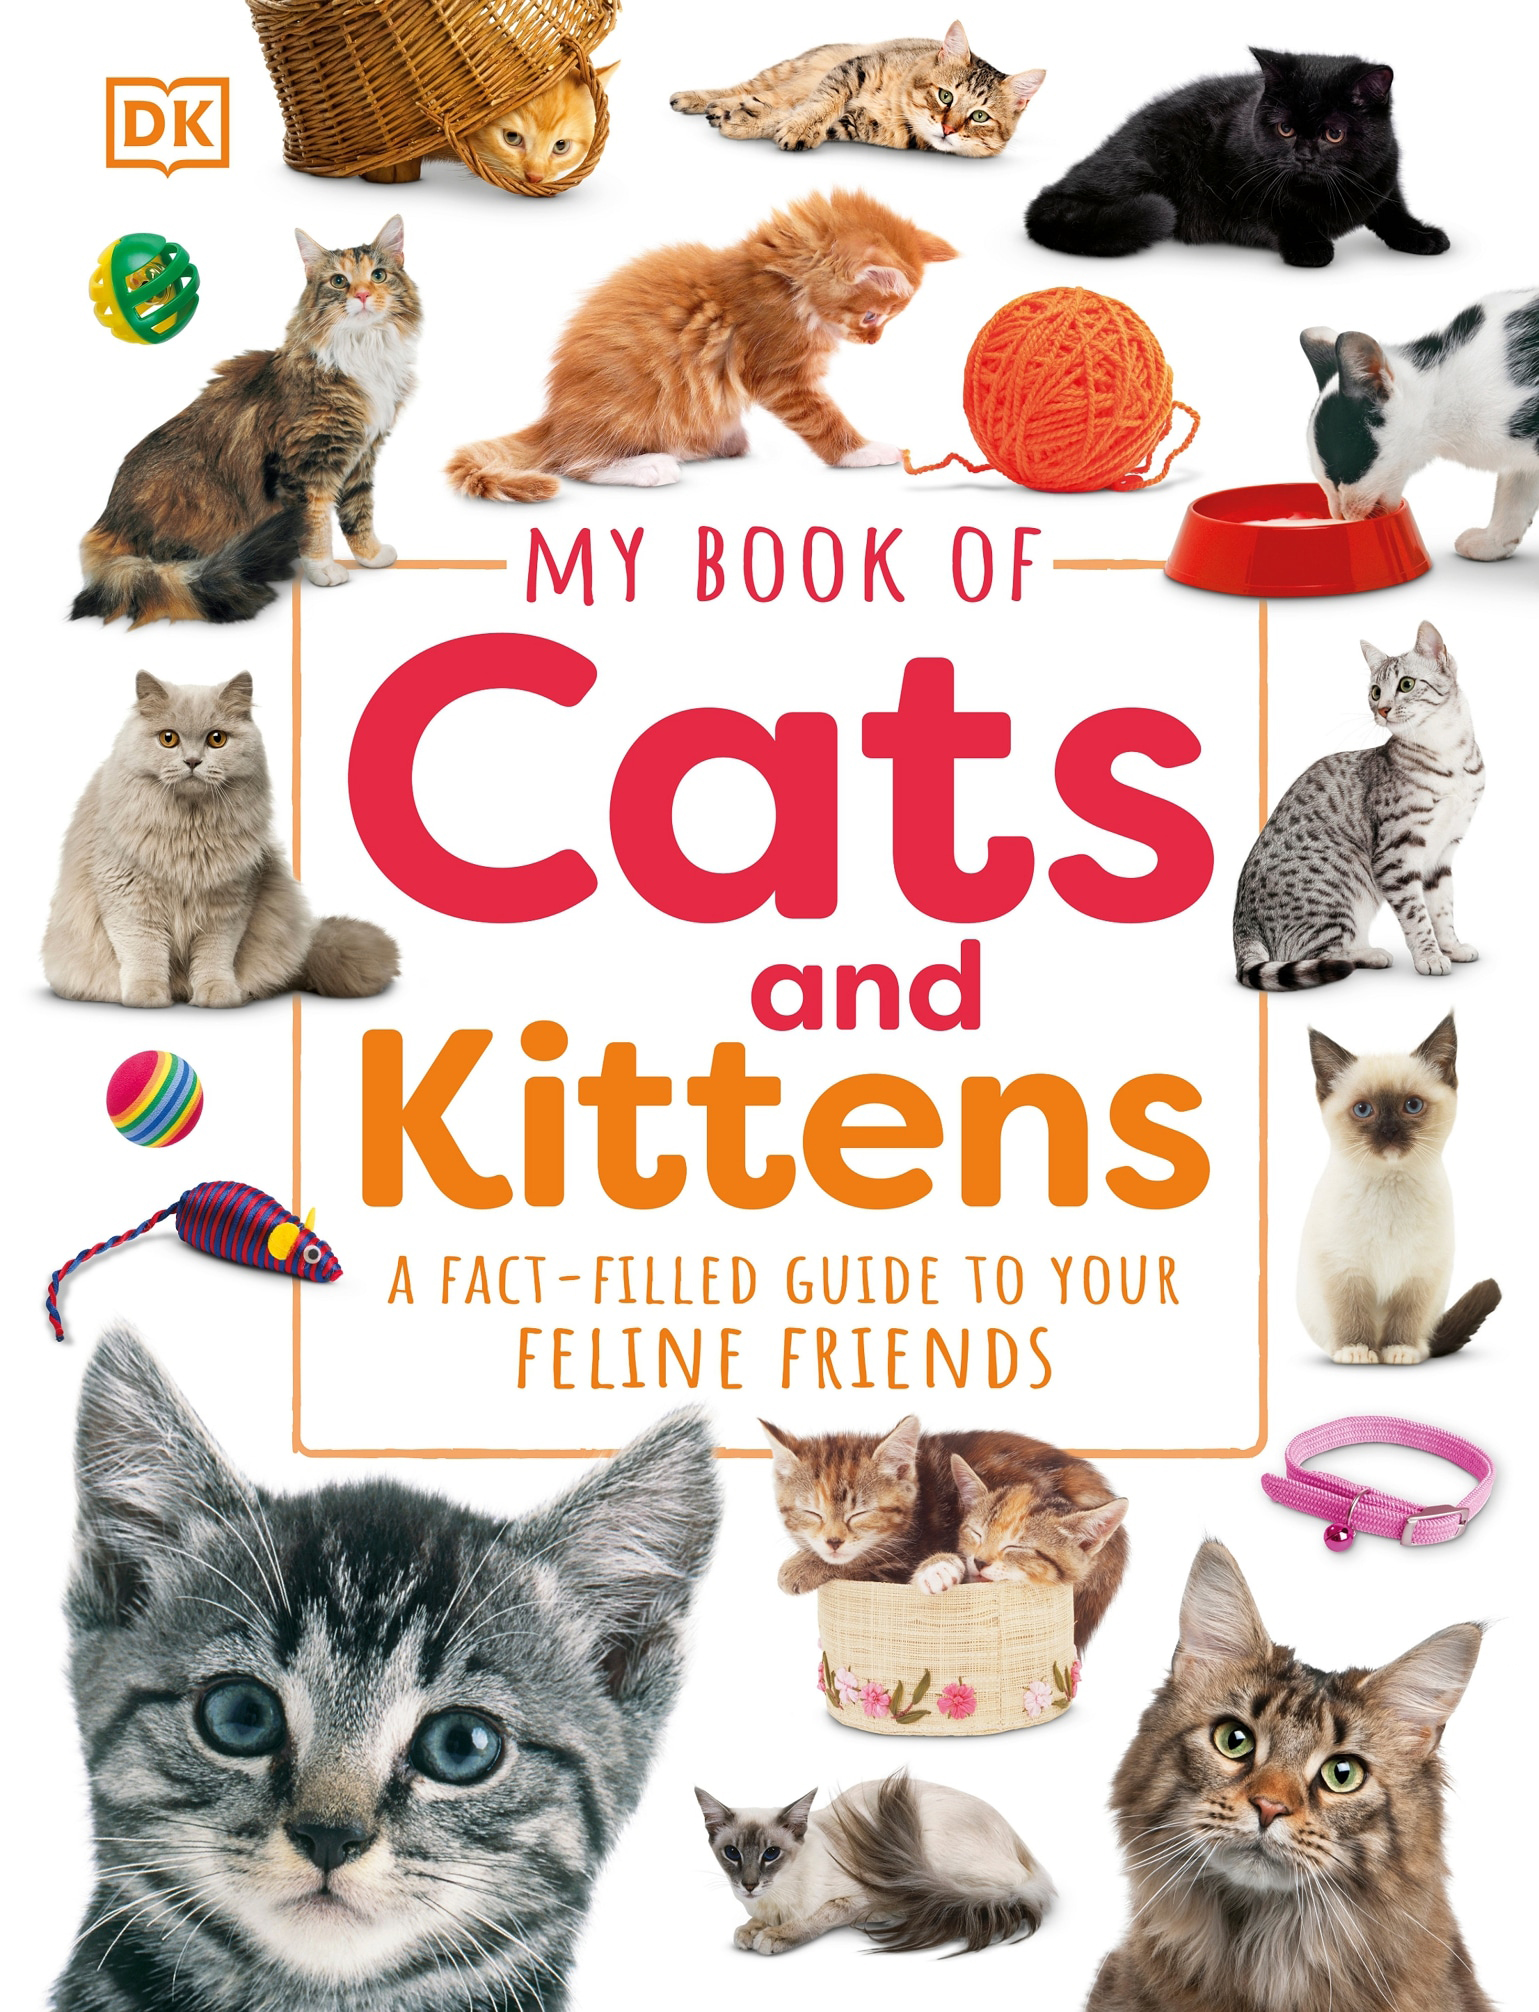 my book of Cats Kittens and Due to the complex integration of im ages - photo 1